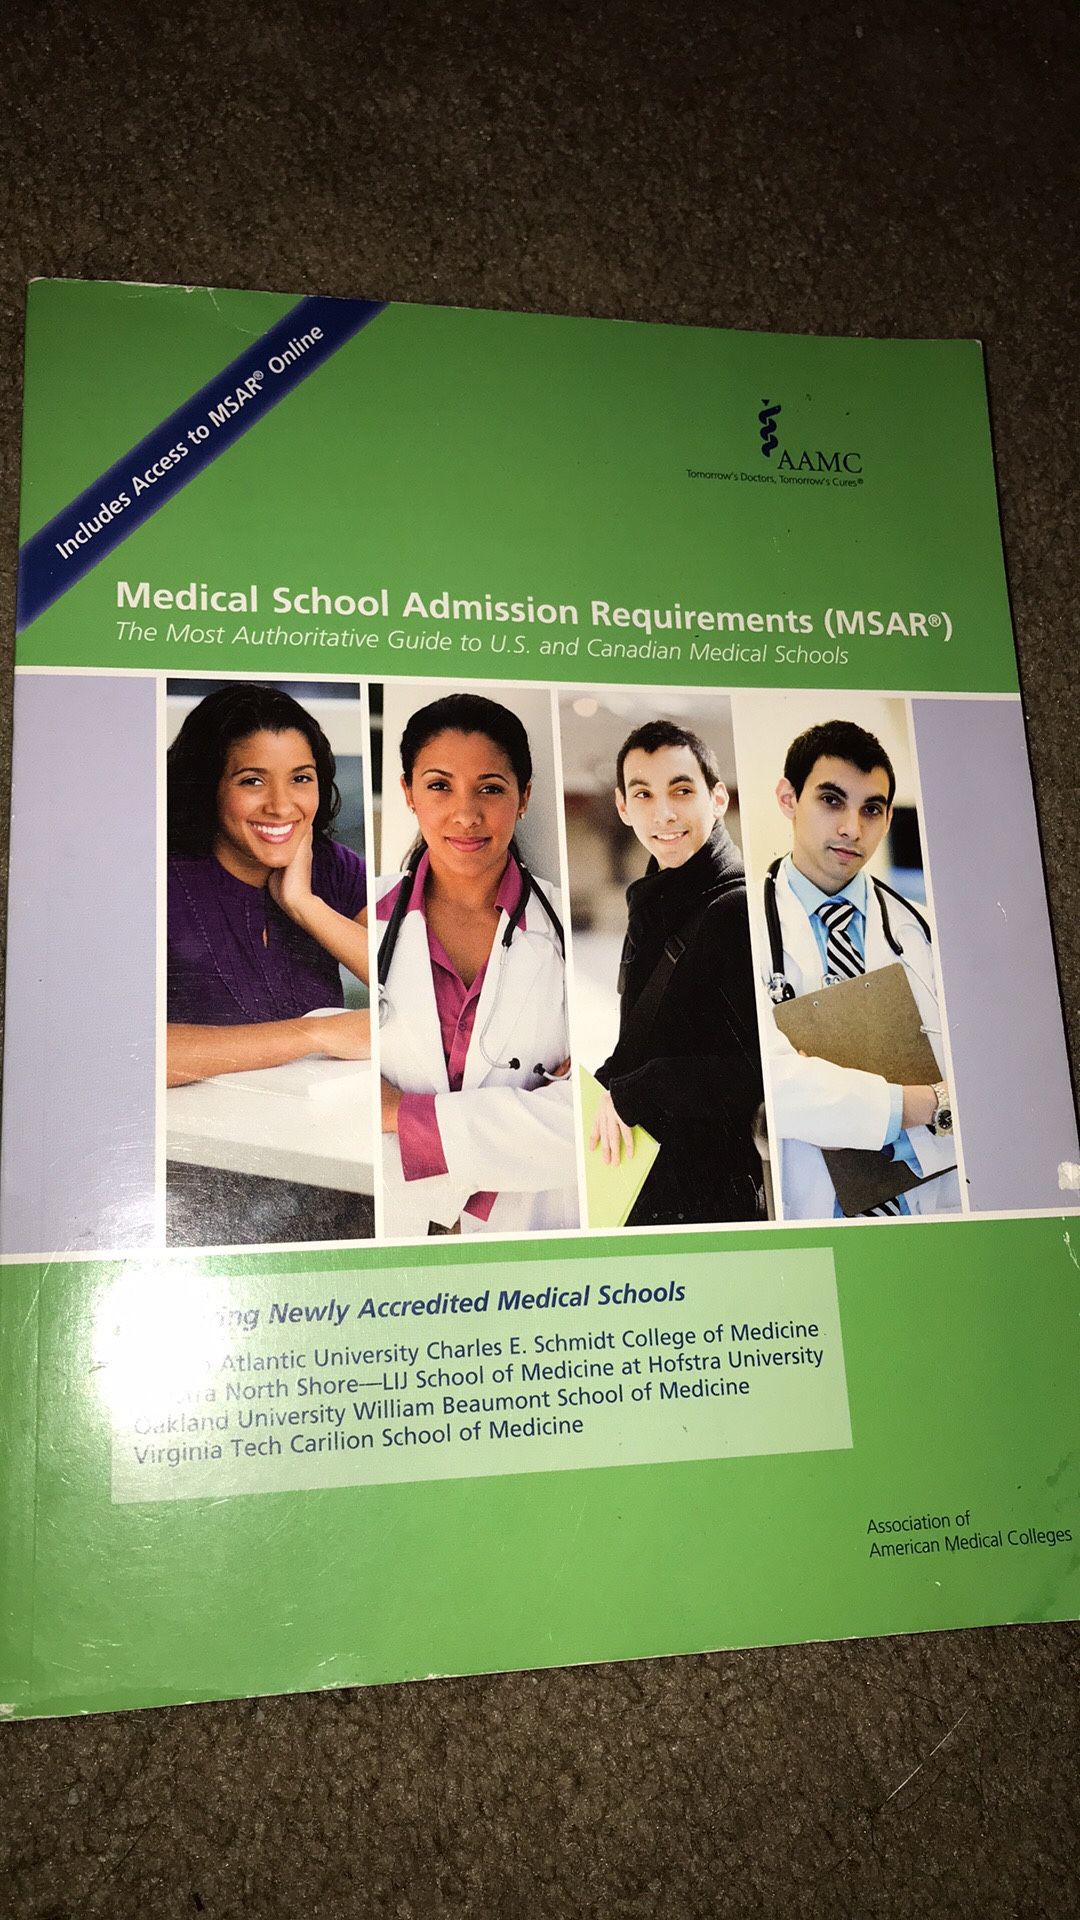 Medical school admission requirements